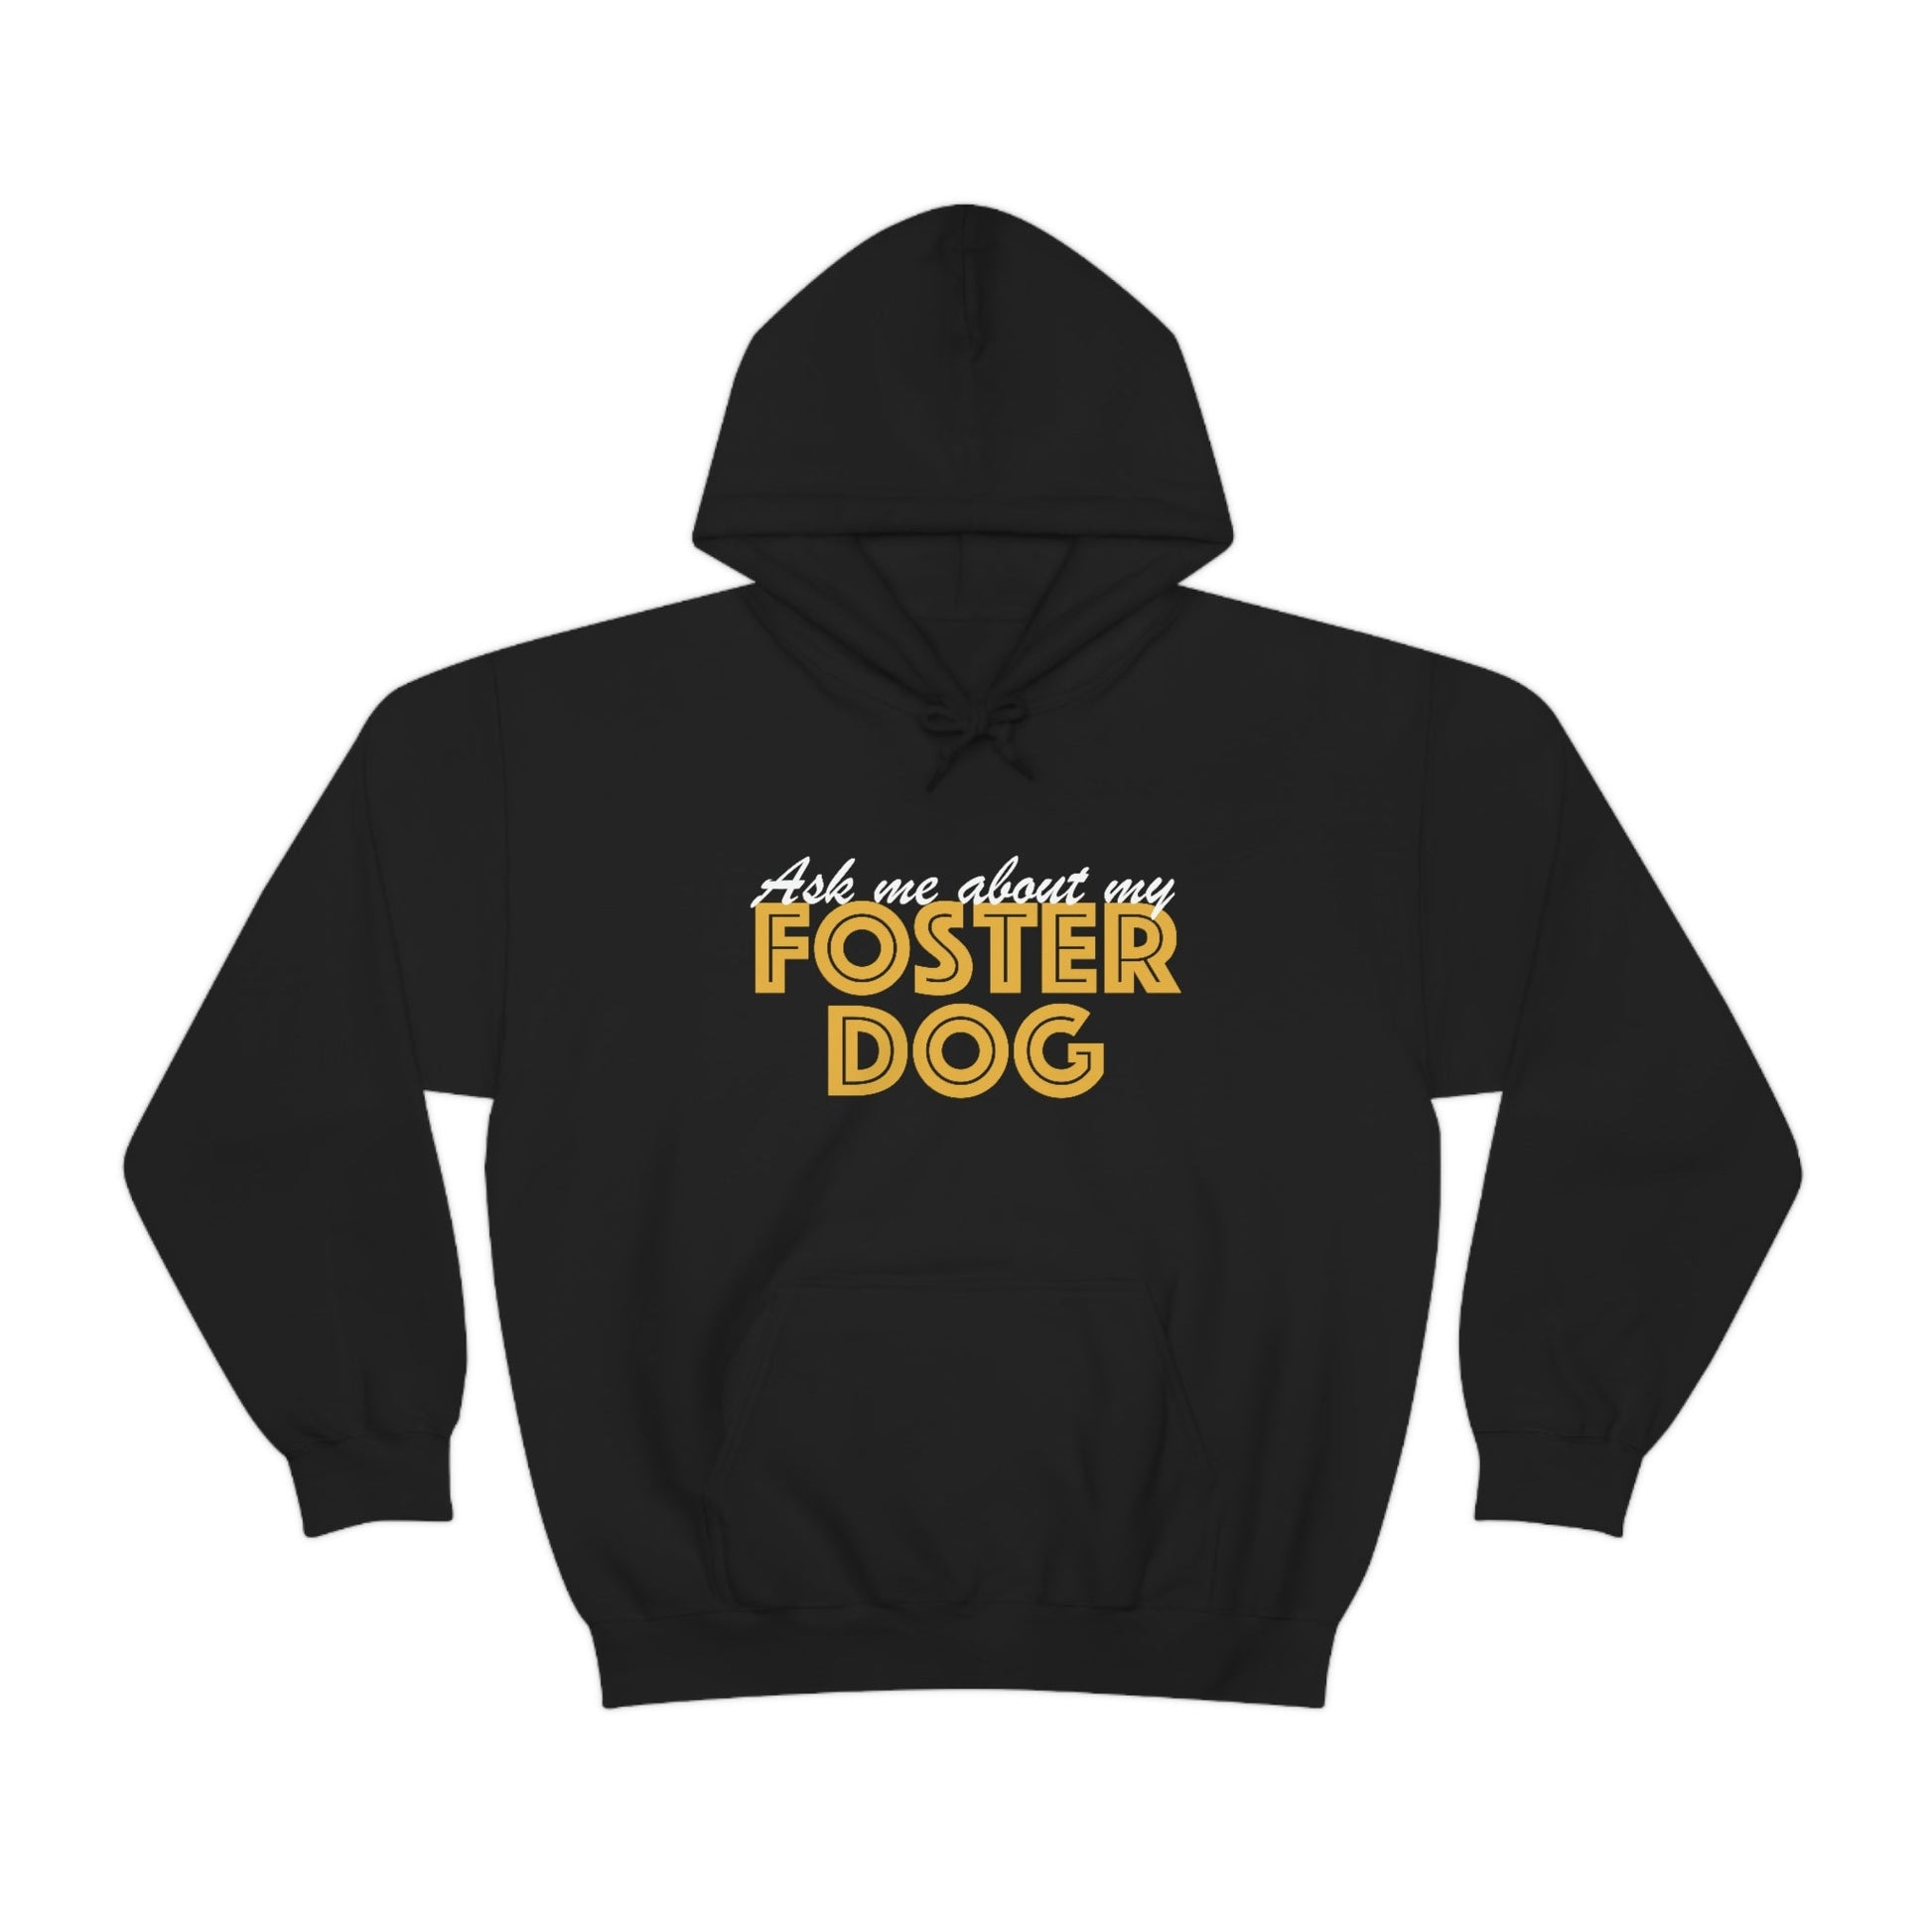 Ask Me About My Foster Dog | Hooded Sweatshirt - Detezi Designs-17245315581400727290